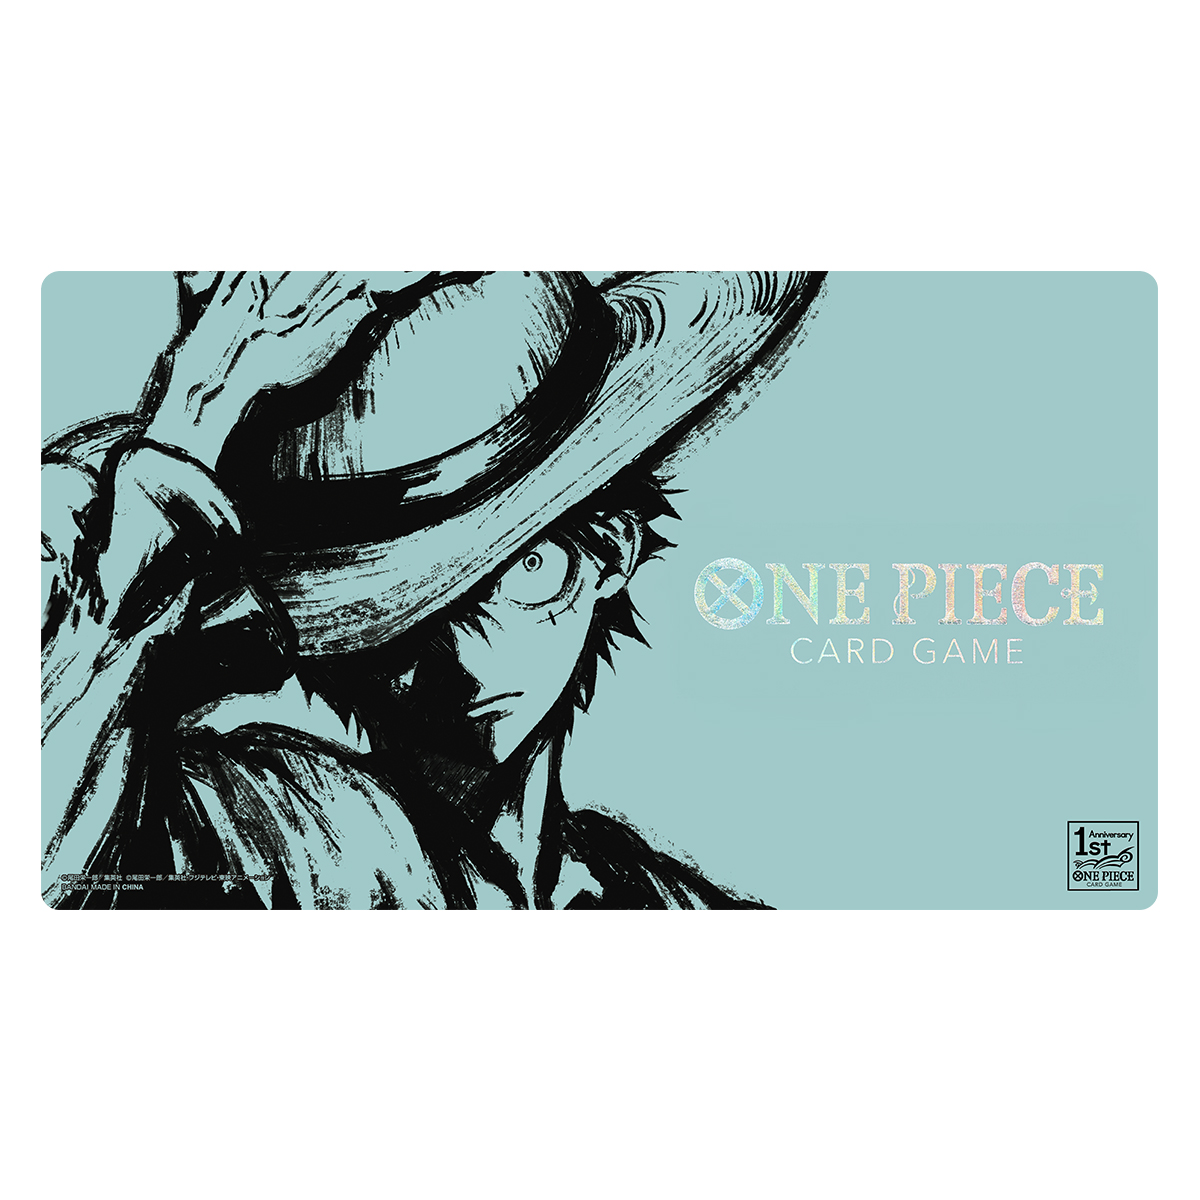 One Piece Card Game】Unboxing the Storage Box × DON!! Card Set from Premium  Bandai !!! 